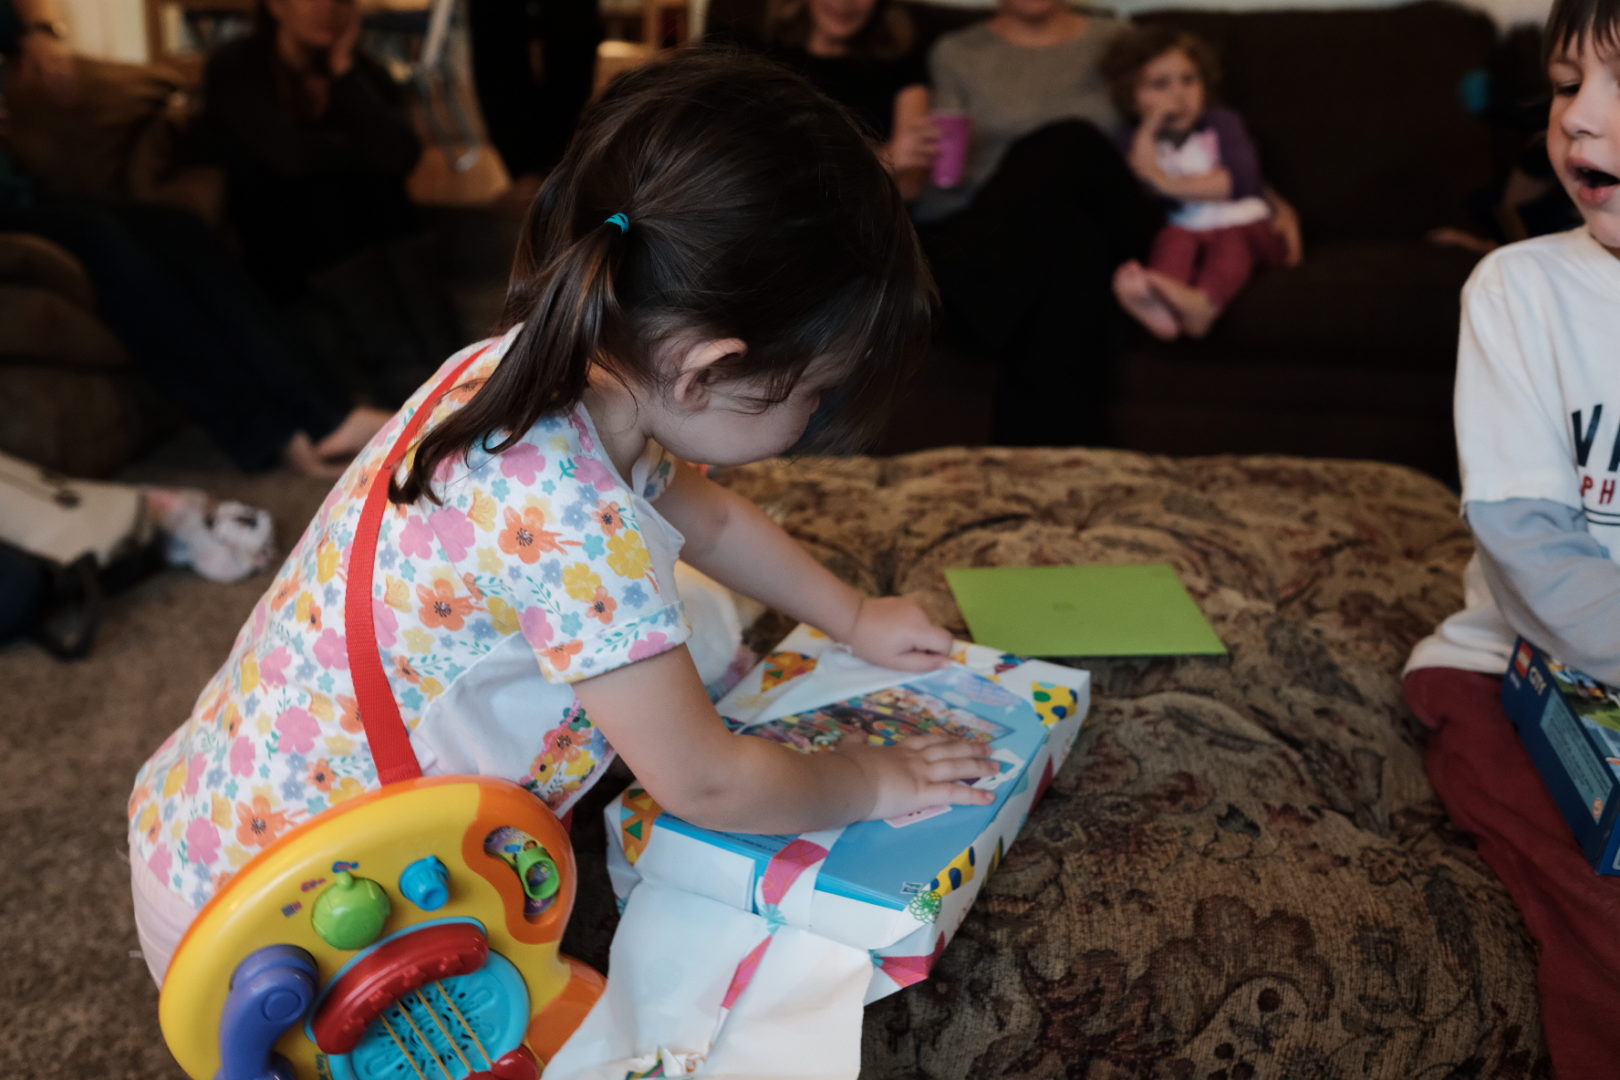 A little girl with a toy guitar around her shoulder opens a birthday present with Candyland.